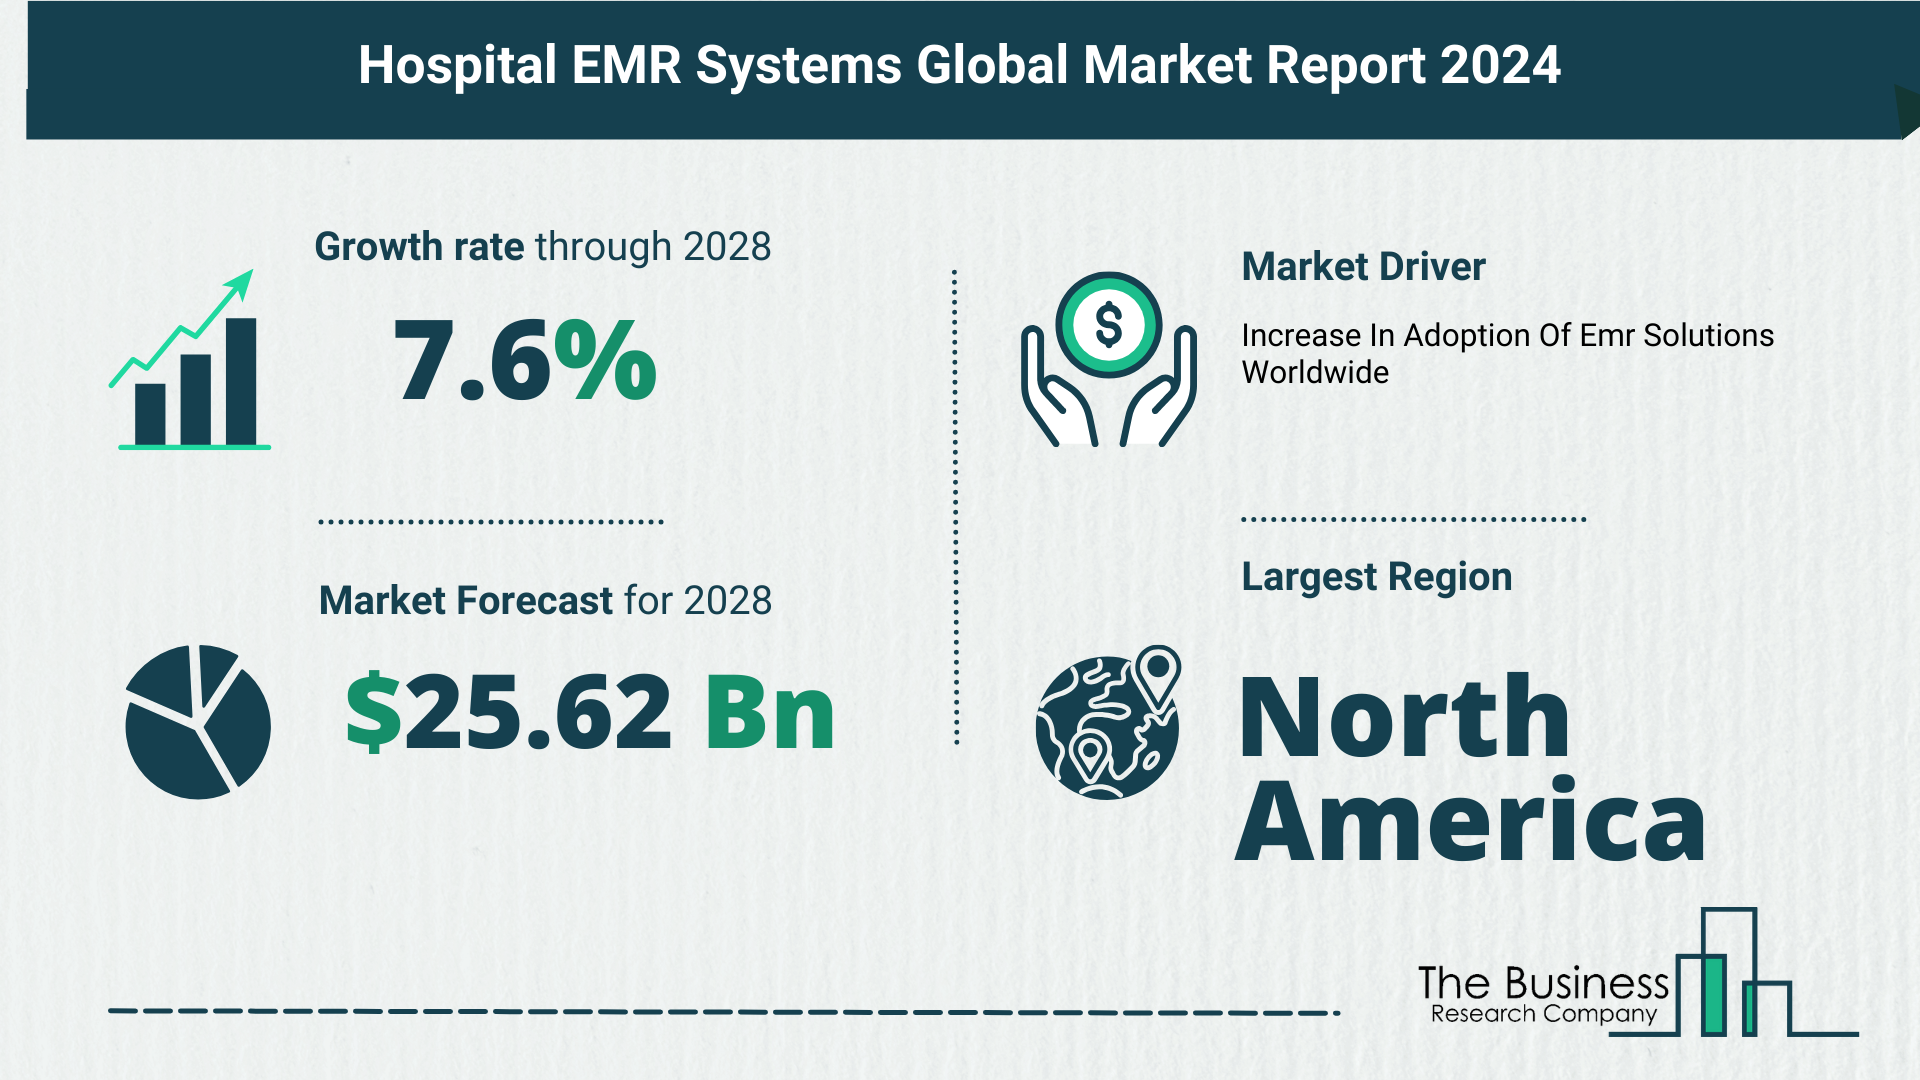 How Is The Hospital EMR Systems Market Expected To Grow Through 2024-2033